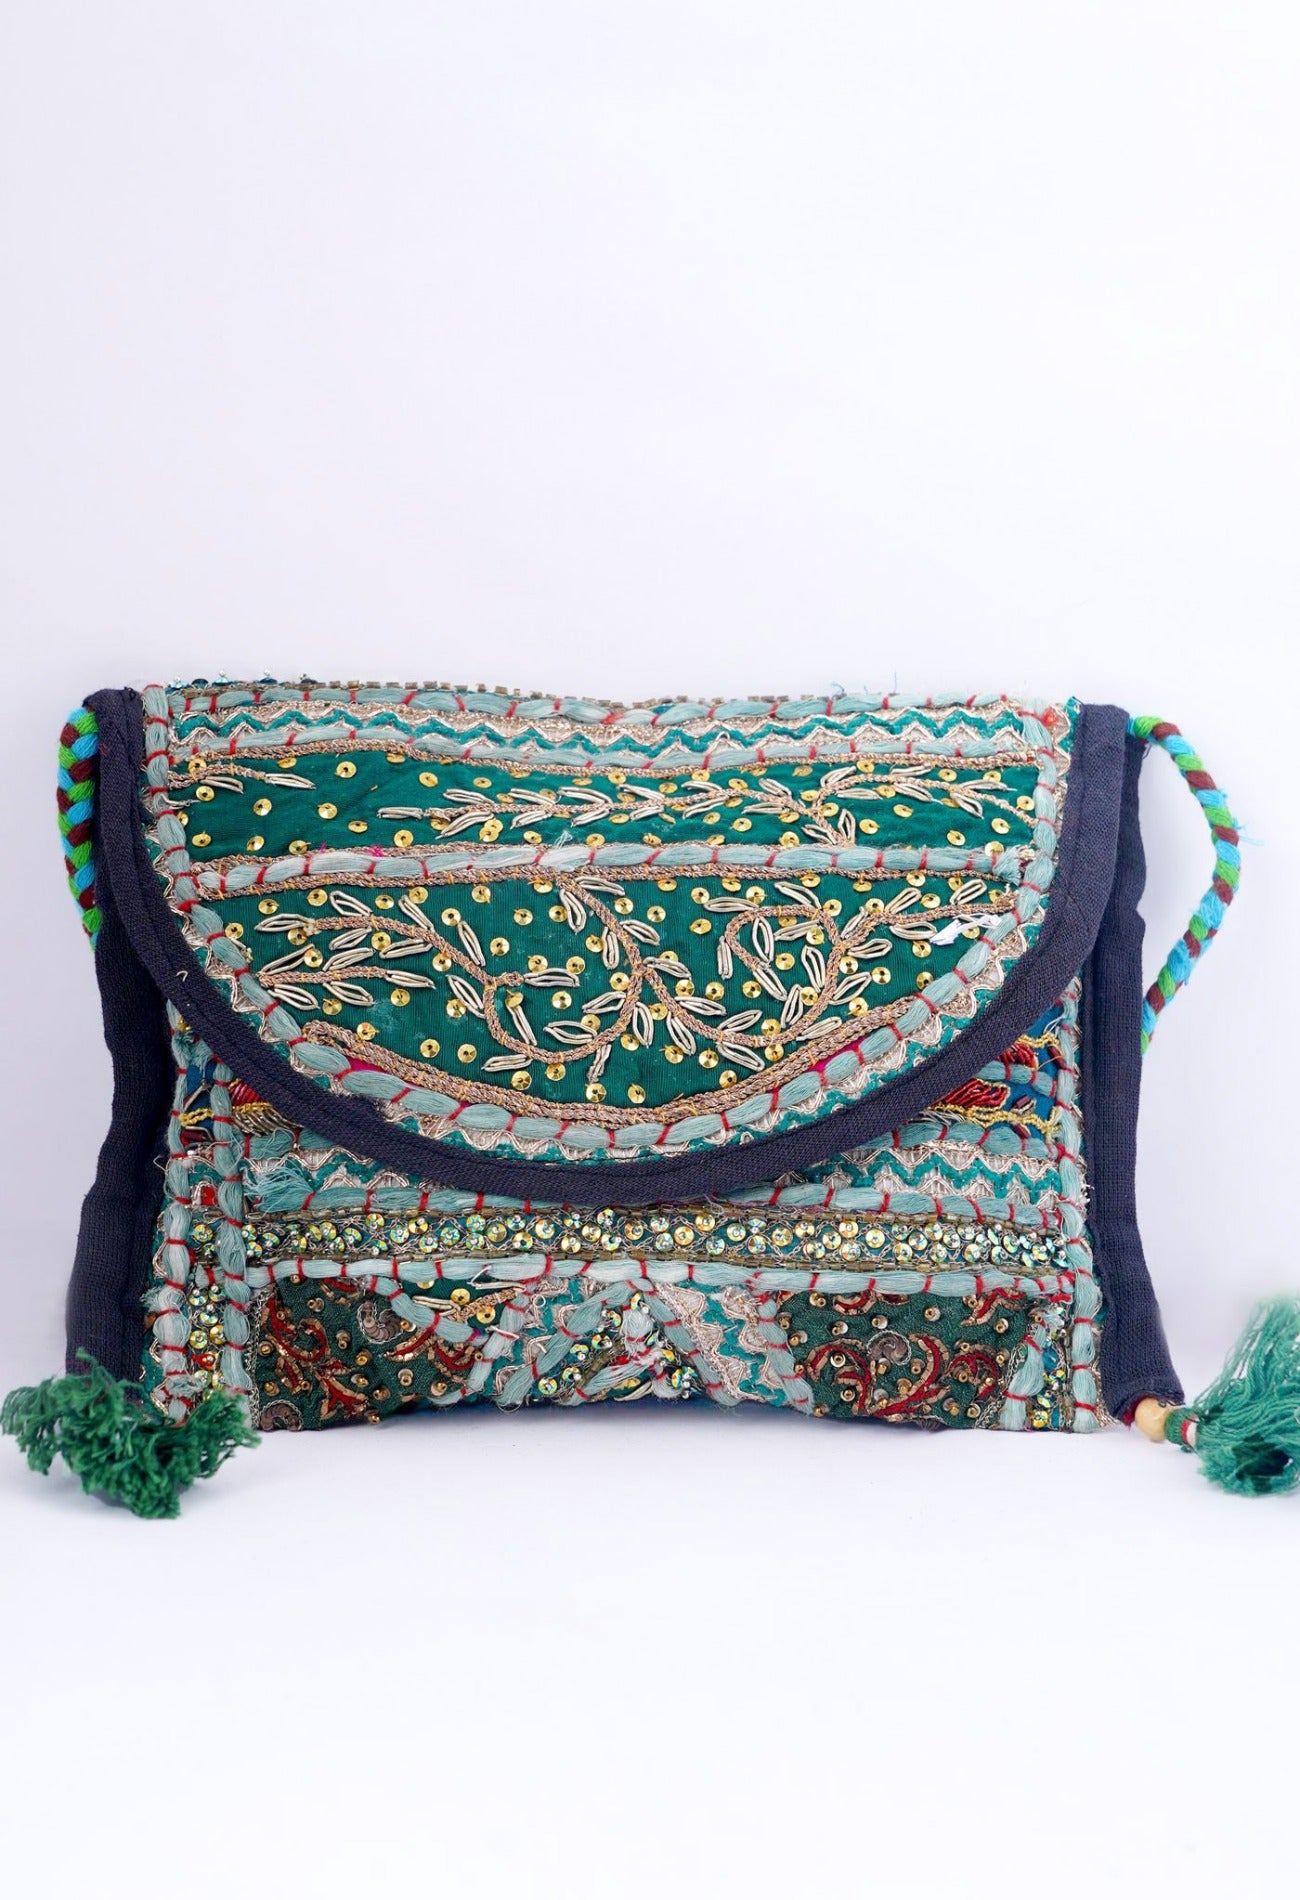 Online Shopping for Green Indian Handicraft Embroidered Hand Bag with Weaving from Rajasthan at Unnatisilks.com India_x000D_
Online Shopping for Green Indian Handicraft Embroidered Hand Bag with Weaving from Rajasthan at Unnatisilks.com India_x000D_
